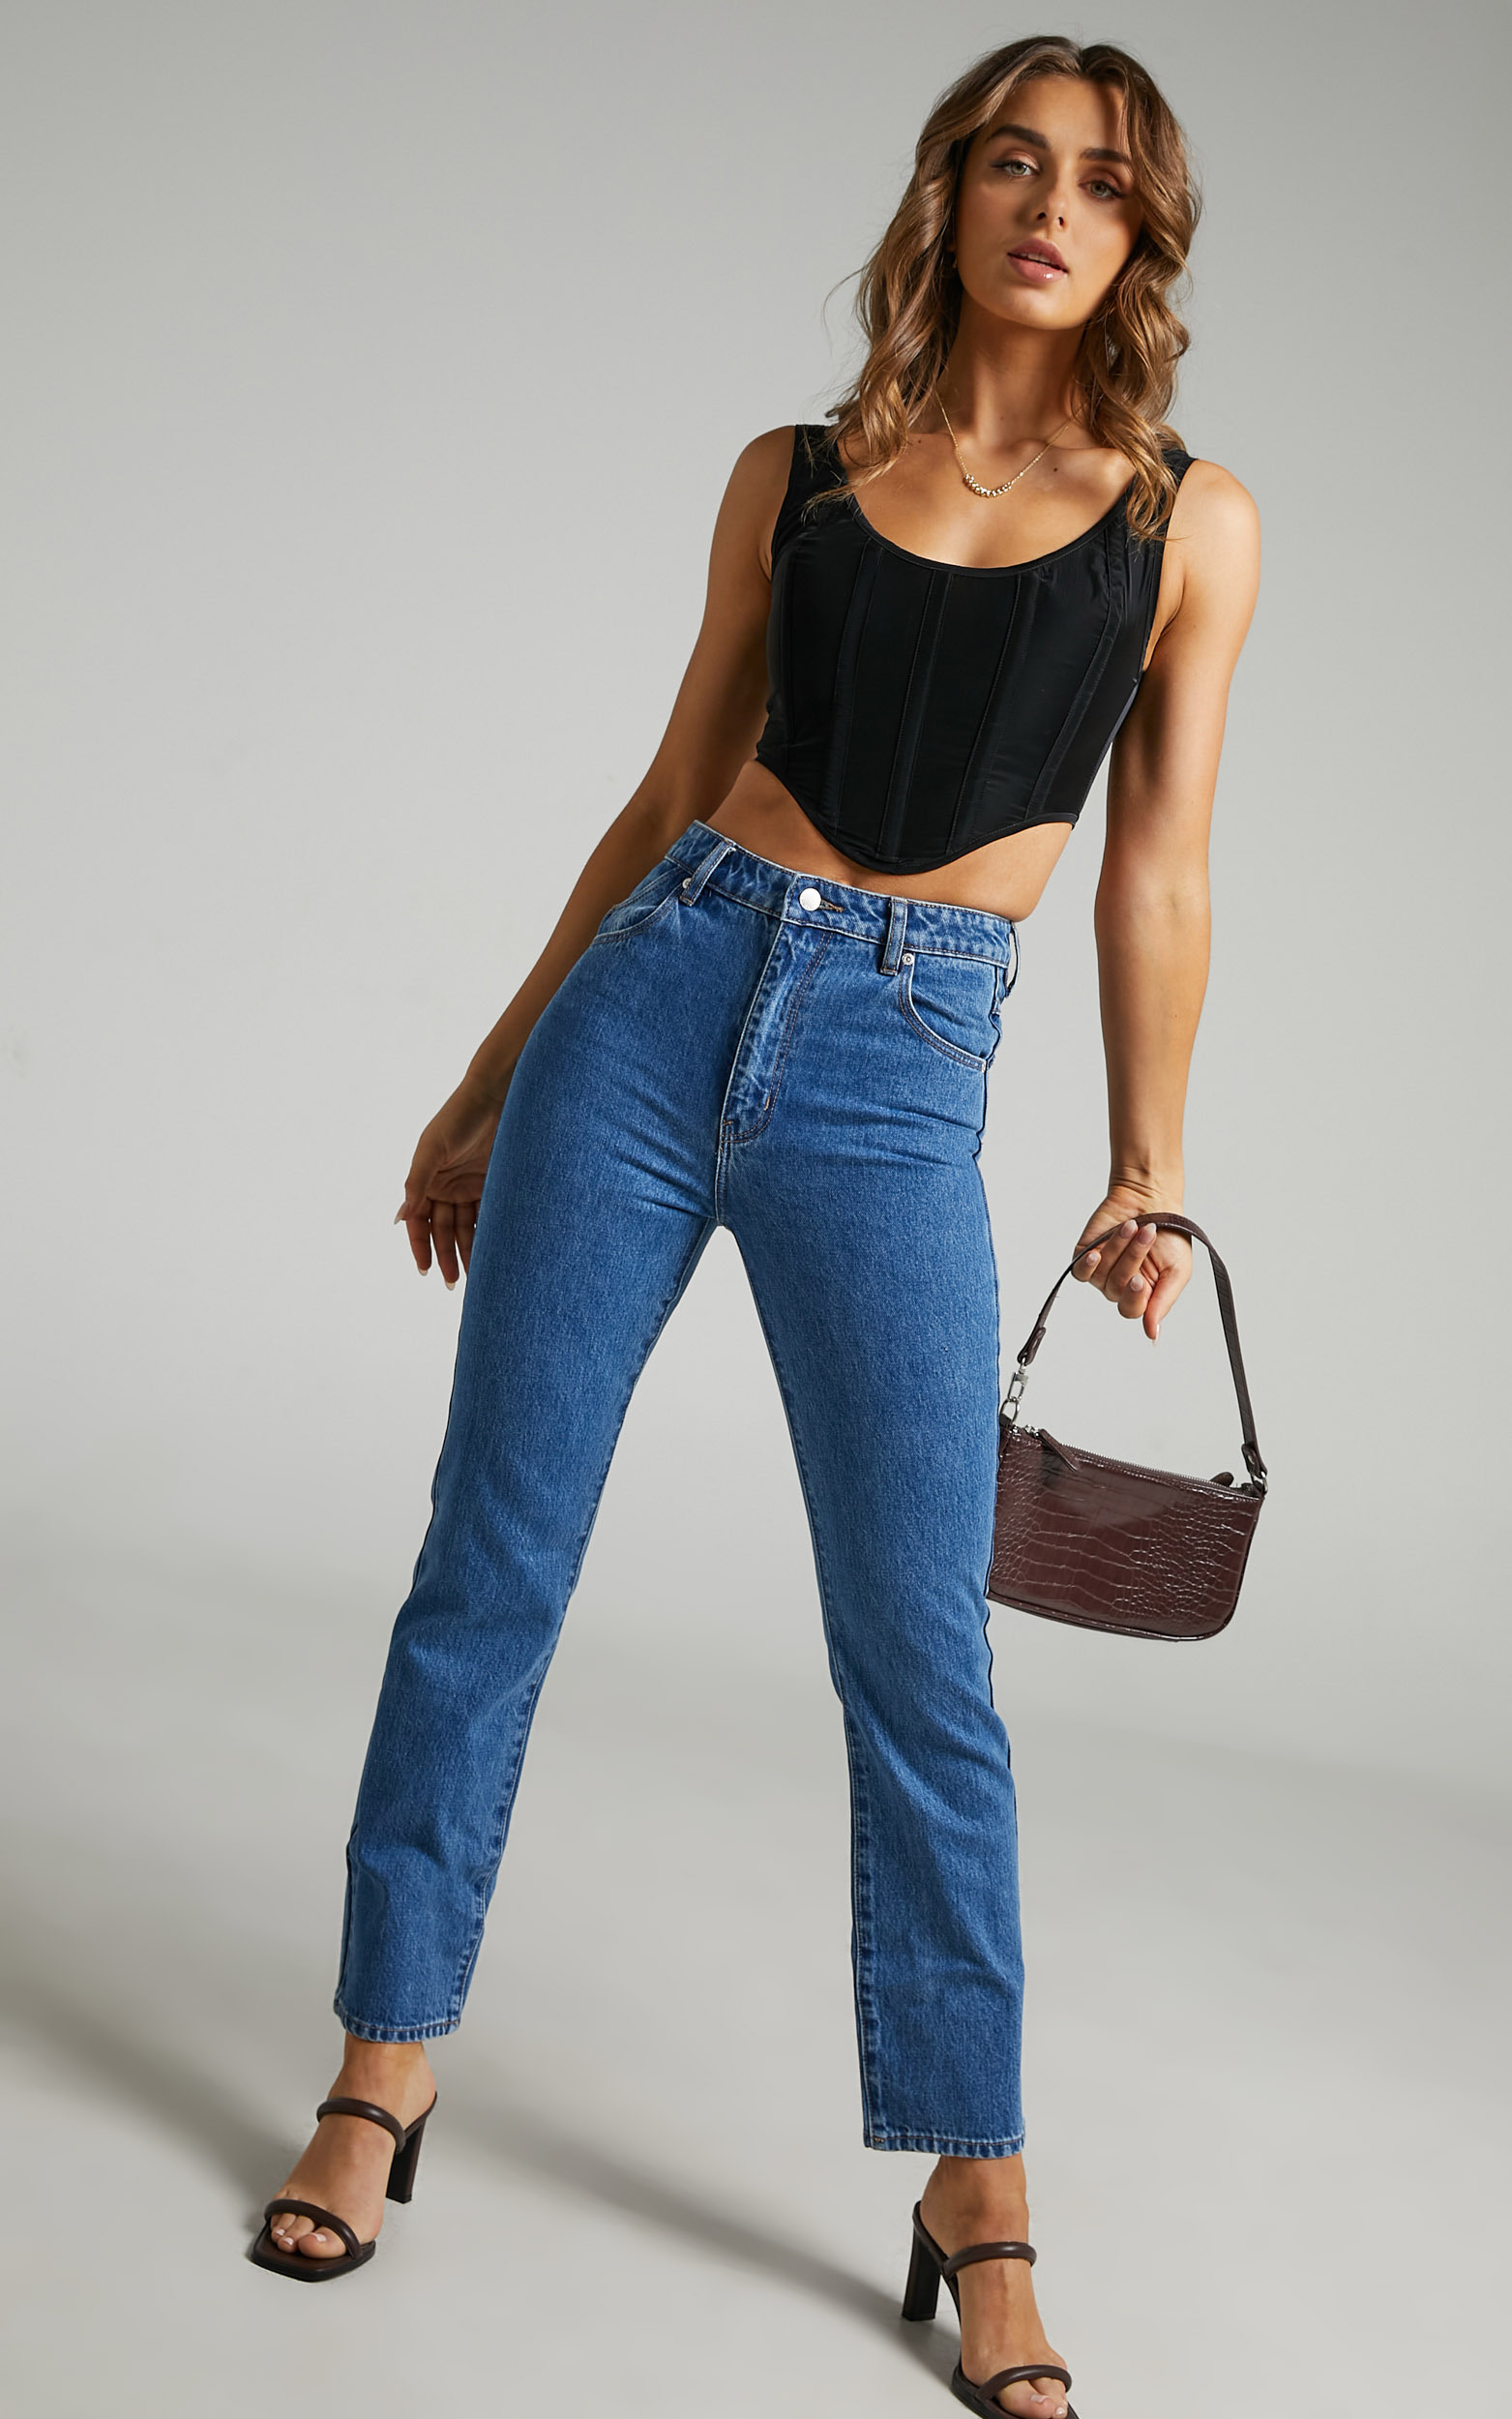 Rolla's x Sofia Richie - Original Straight Jean in ASHLEY BLUE - 06, BLU1, hi-res image number null